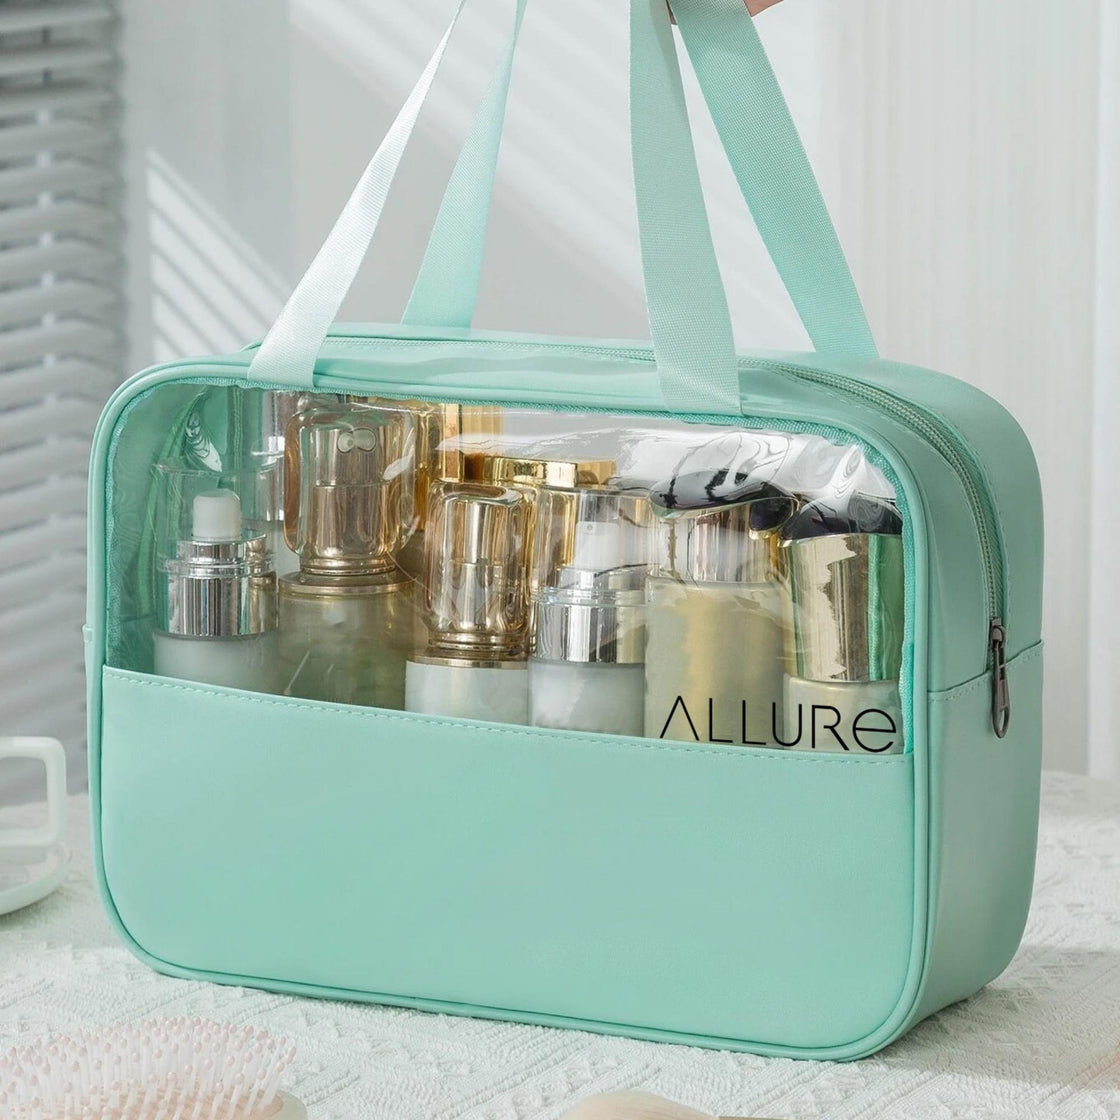 Allure Toiletry Bag large Green